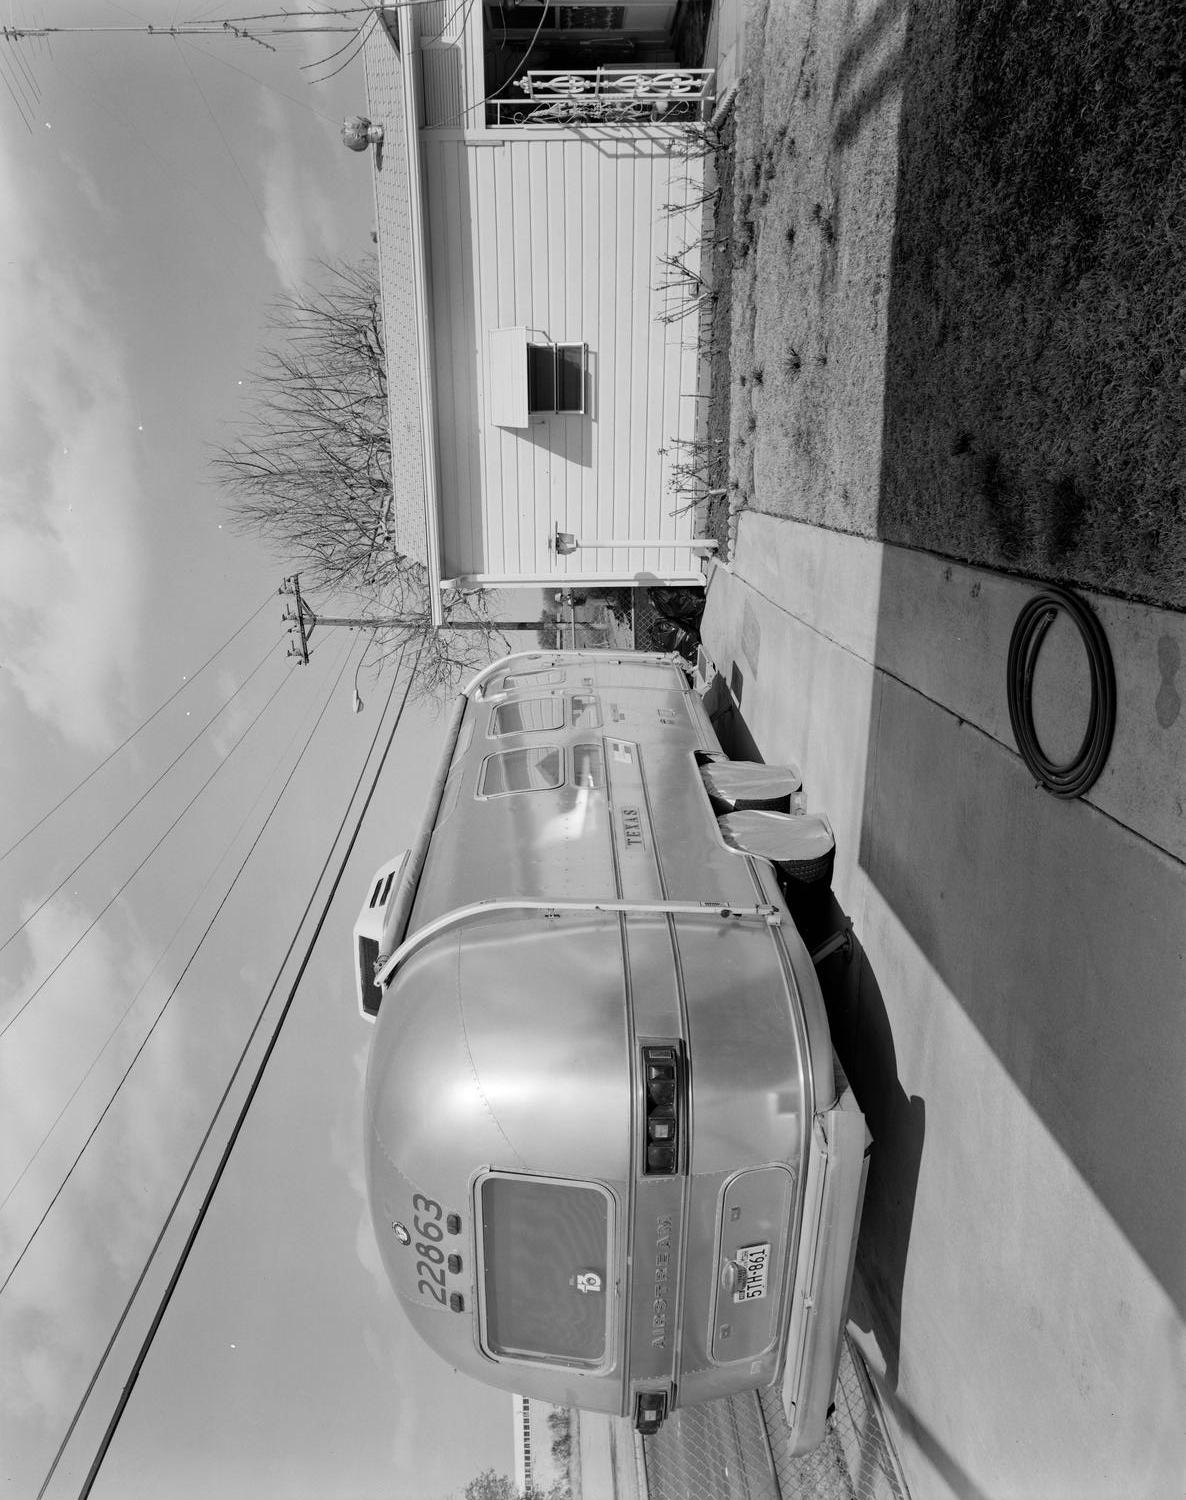 [An airstream next to a house]
                                                
                                                    [Sequence #]: 1 of 1
                                                